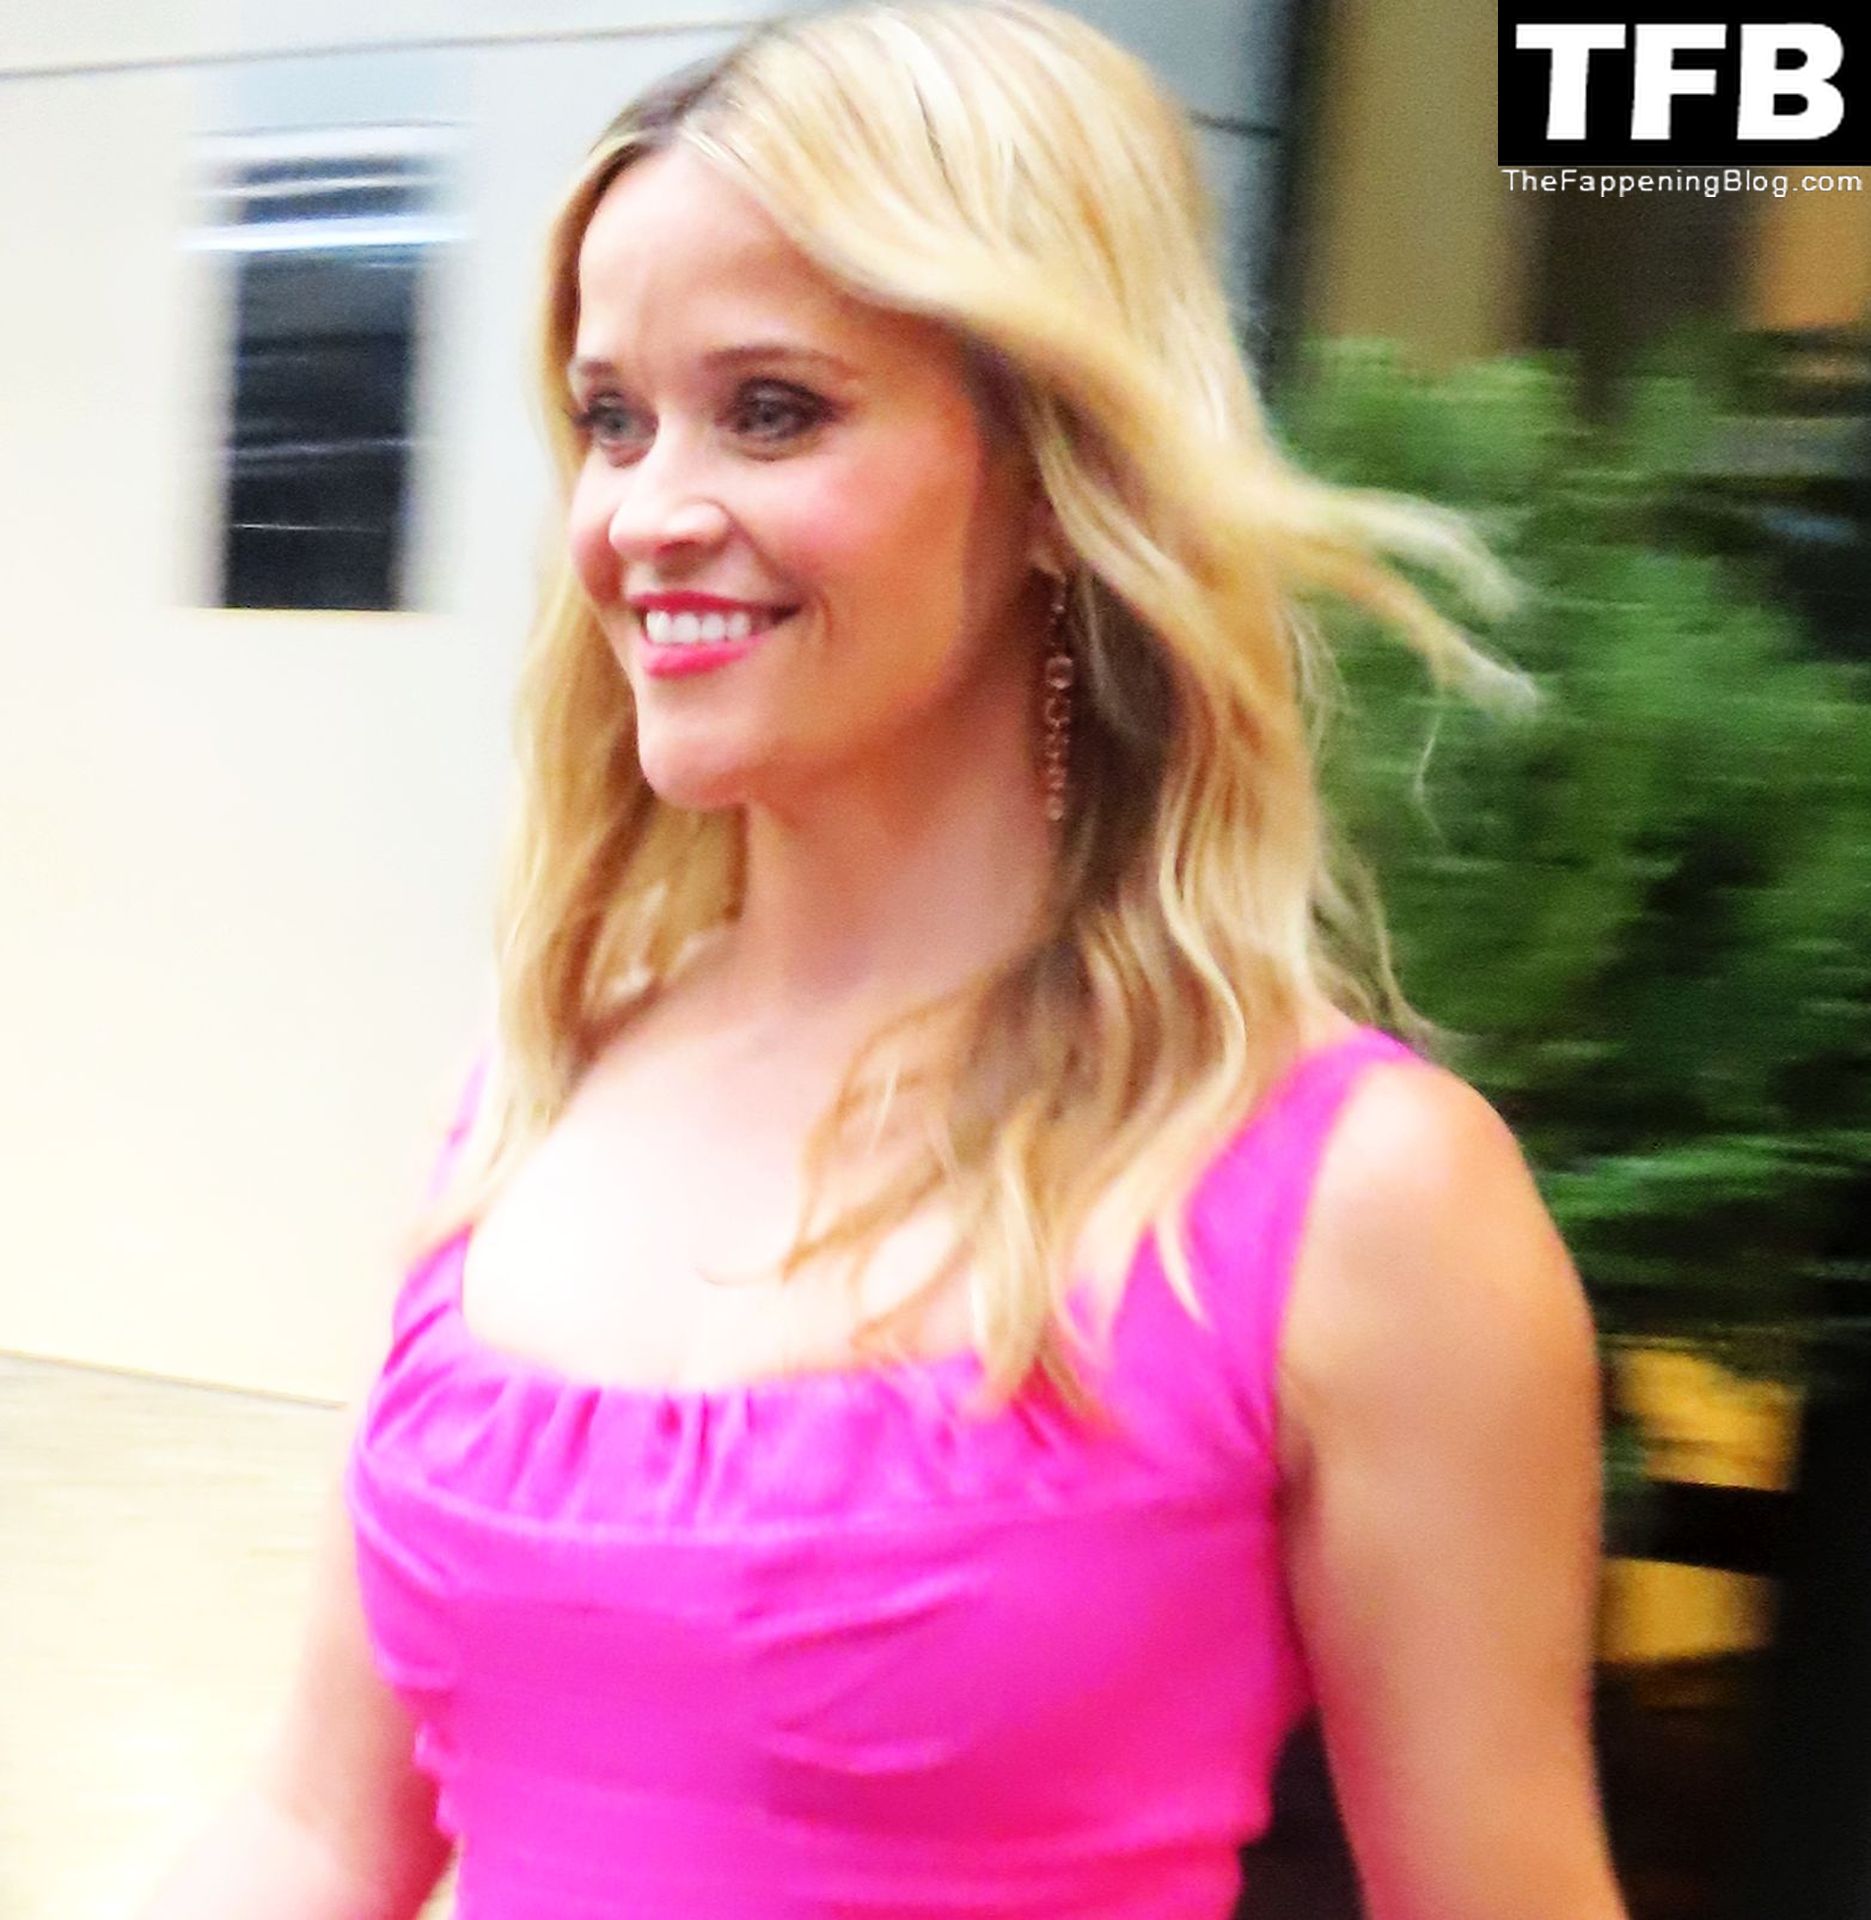 Reese-Witherspoon-Sexy-The-Fappening-Blog-33.jpg